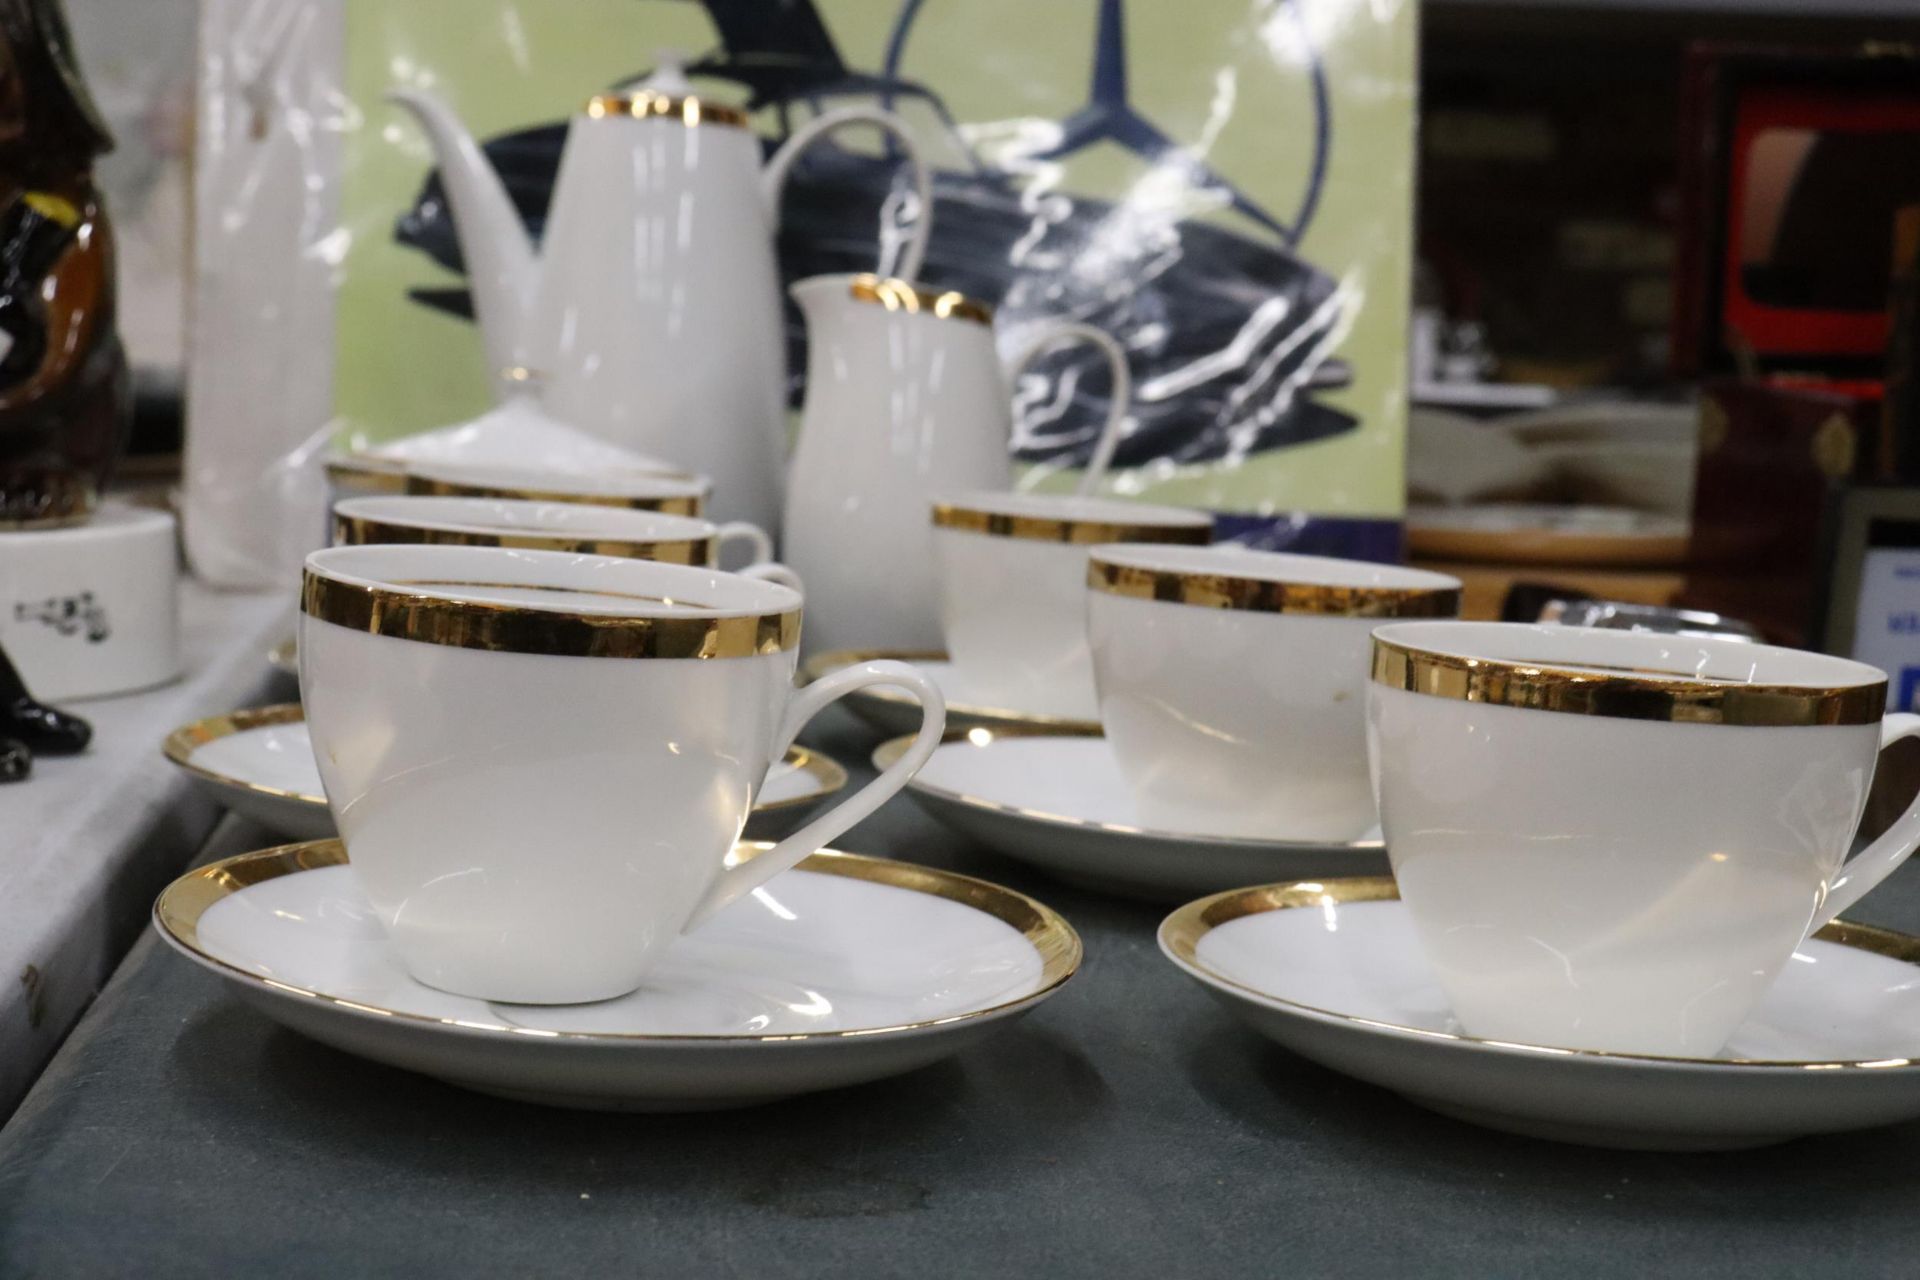 A CZECHOSLOVAKIAN CHINA COFFEE SET TO INCLUDE A COFFEE POT, CREAM JUG, SUGAR BOWL, CUPS AND SAUCERS - Image 2 of 6